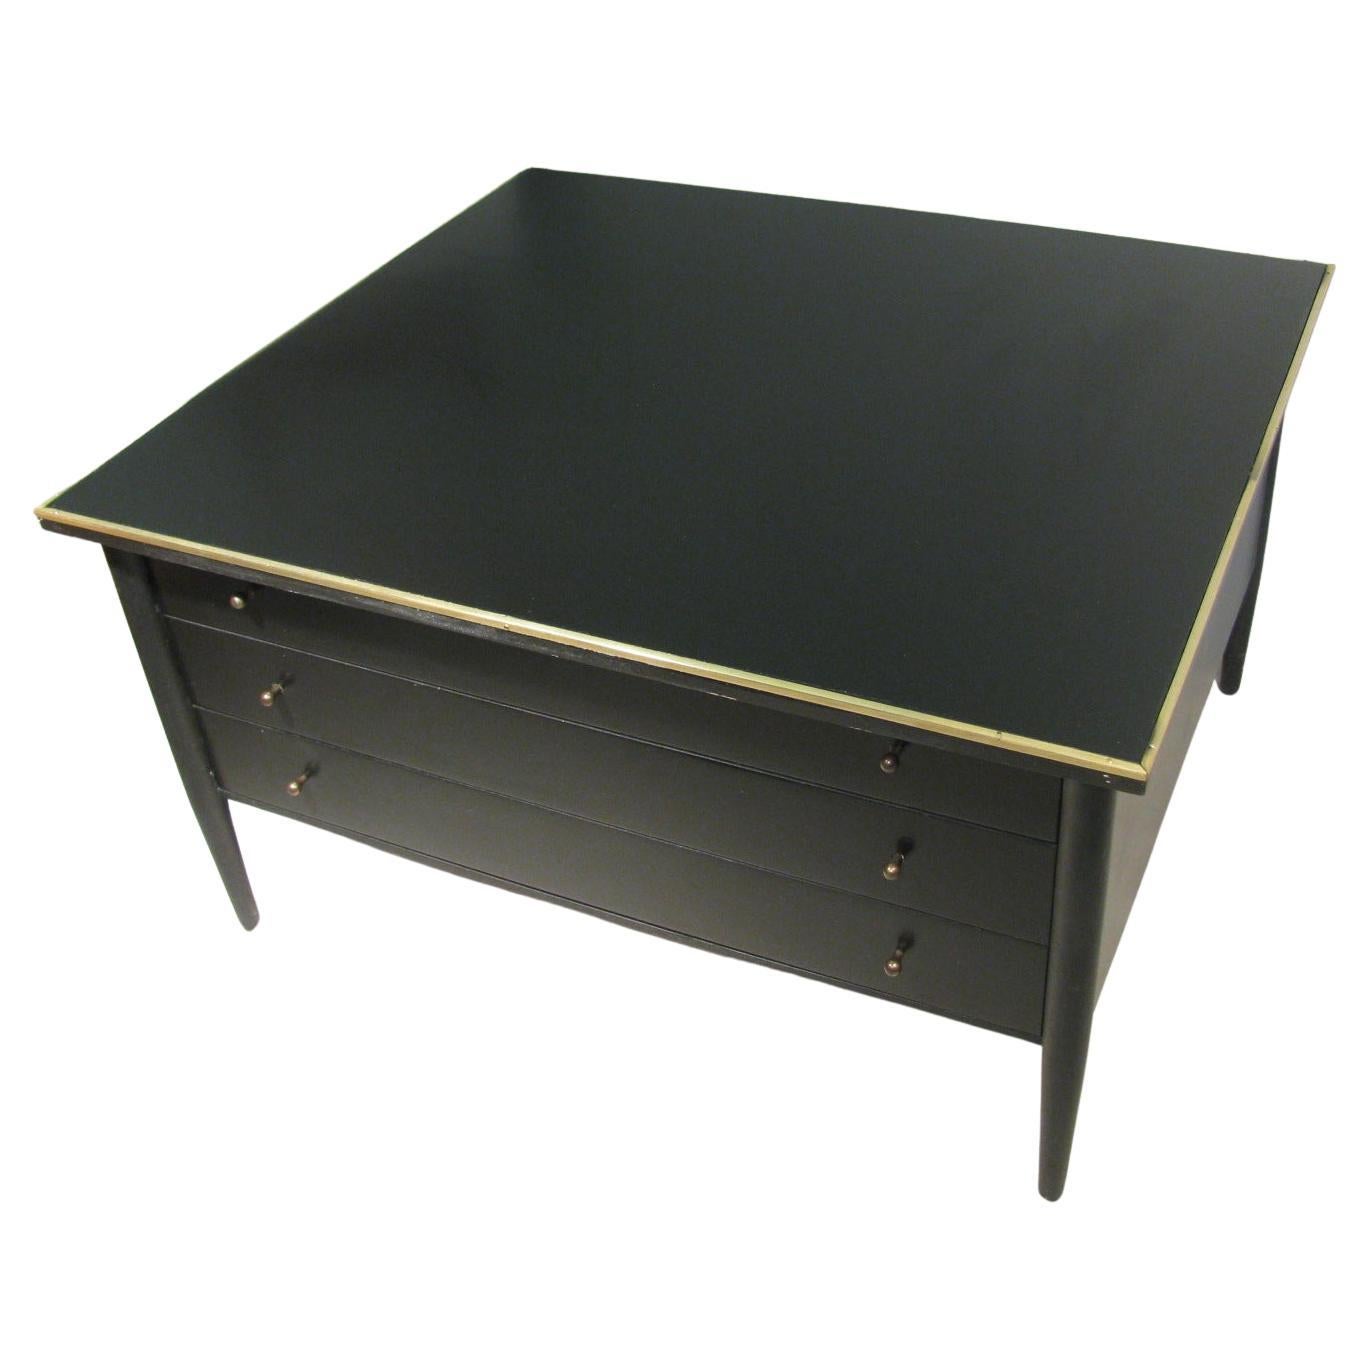 Paul McCobb Connoisseur collection for H. Sacks and Sons, Brookline mass. Three-drawer cocktail table or large end table in black lacquer. Top is framed in brass along with bronzed drawer pulls. A very elegant piece in excellent vintage condition